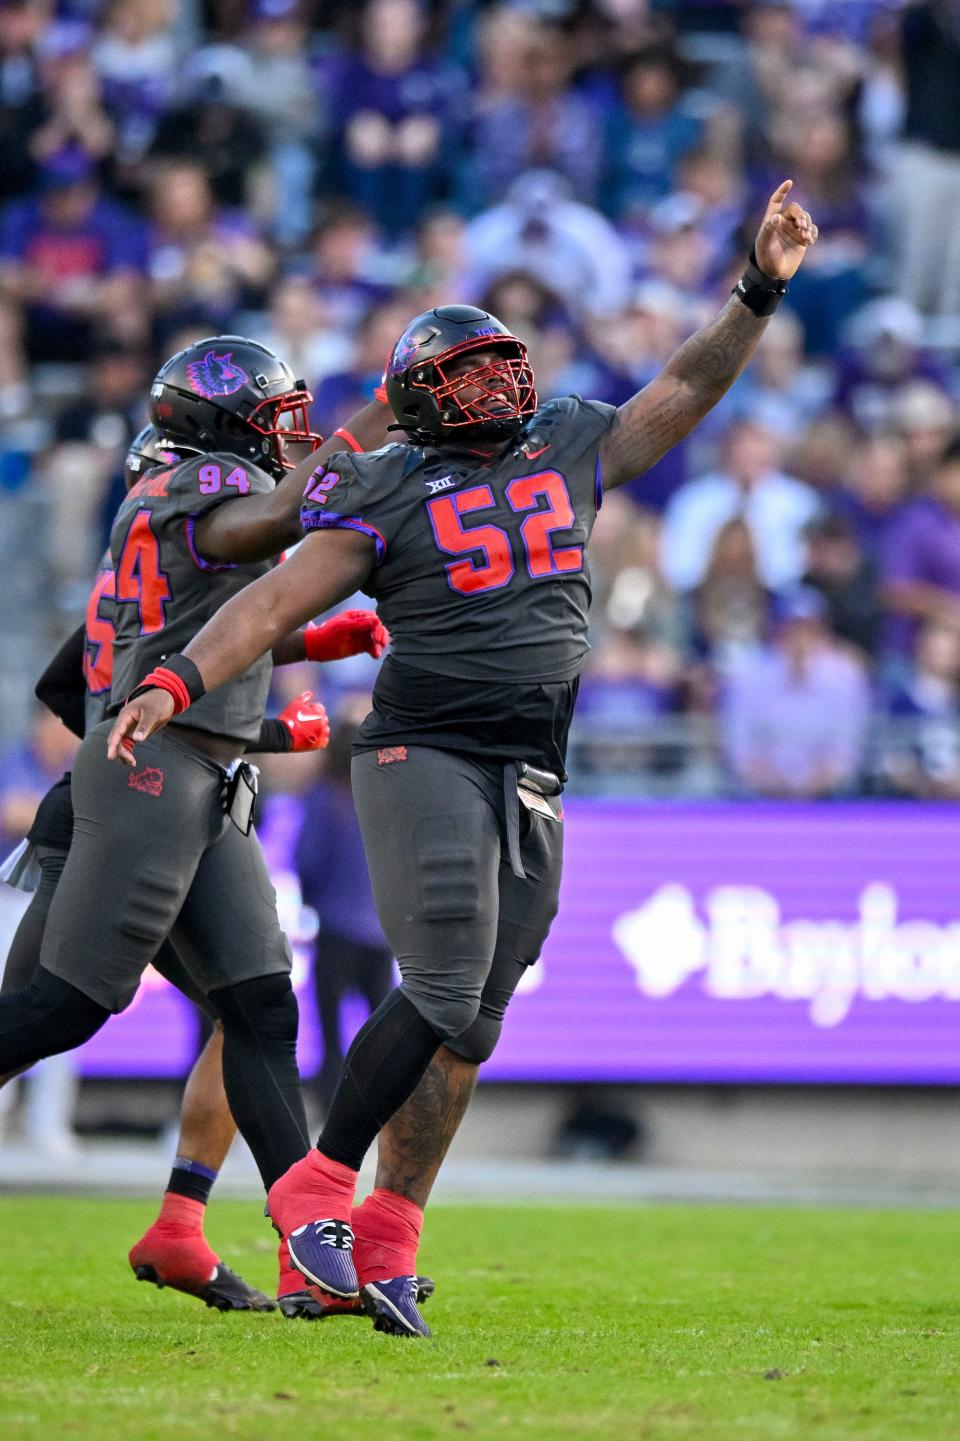 Nov 18, 2023; Fort Worth, Texas, USA; TCU Horned Frogs defensive lineman Damonic Williams (52) in action during the game between the TCU Horned Frogs and the Baylor Bears at Amon G. Carter Stadium. Mandatory Credit: Jerome Miron-USA TODAY Sports